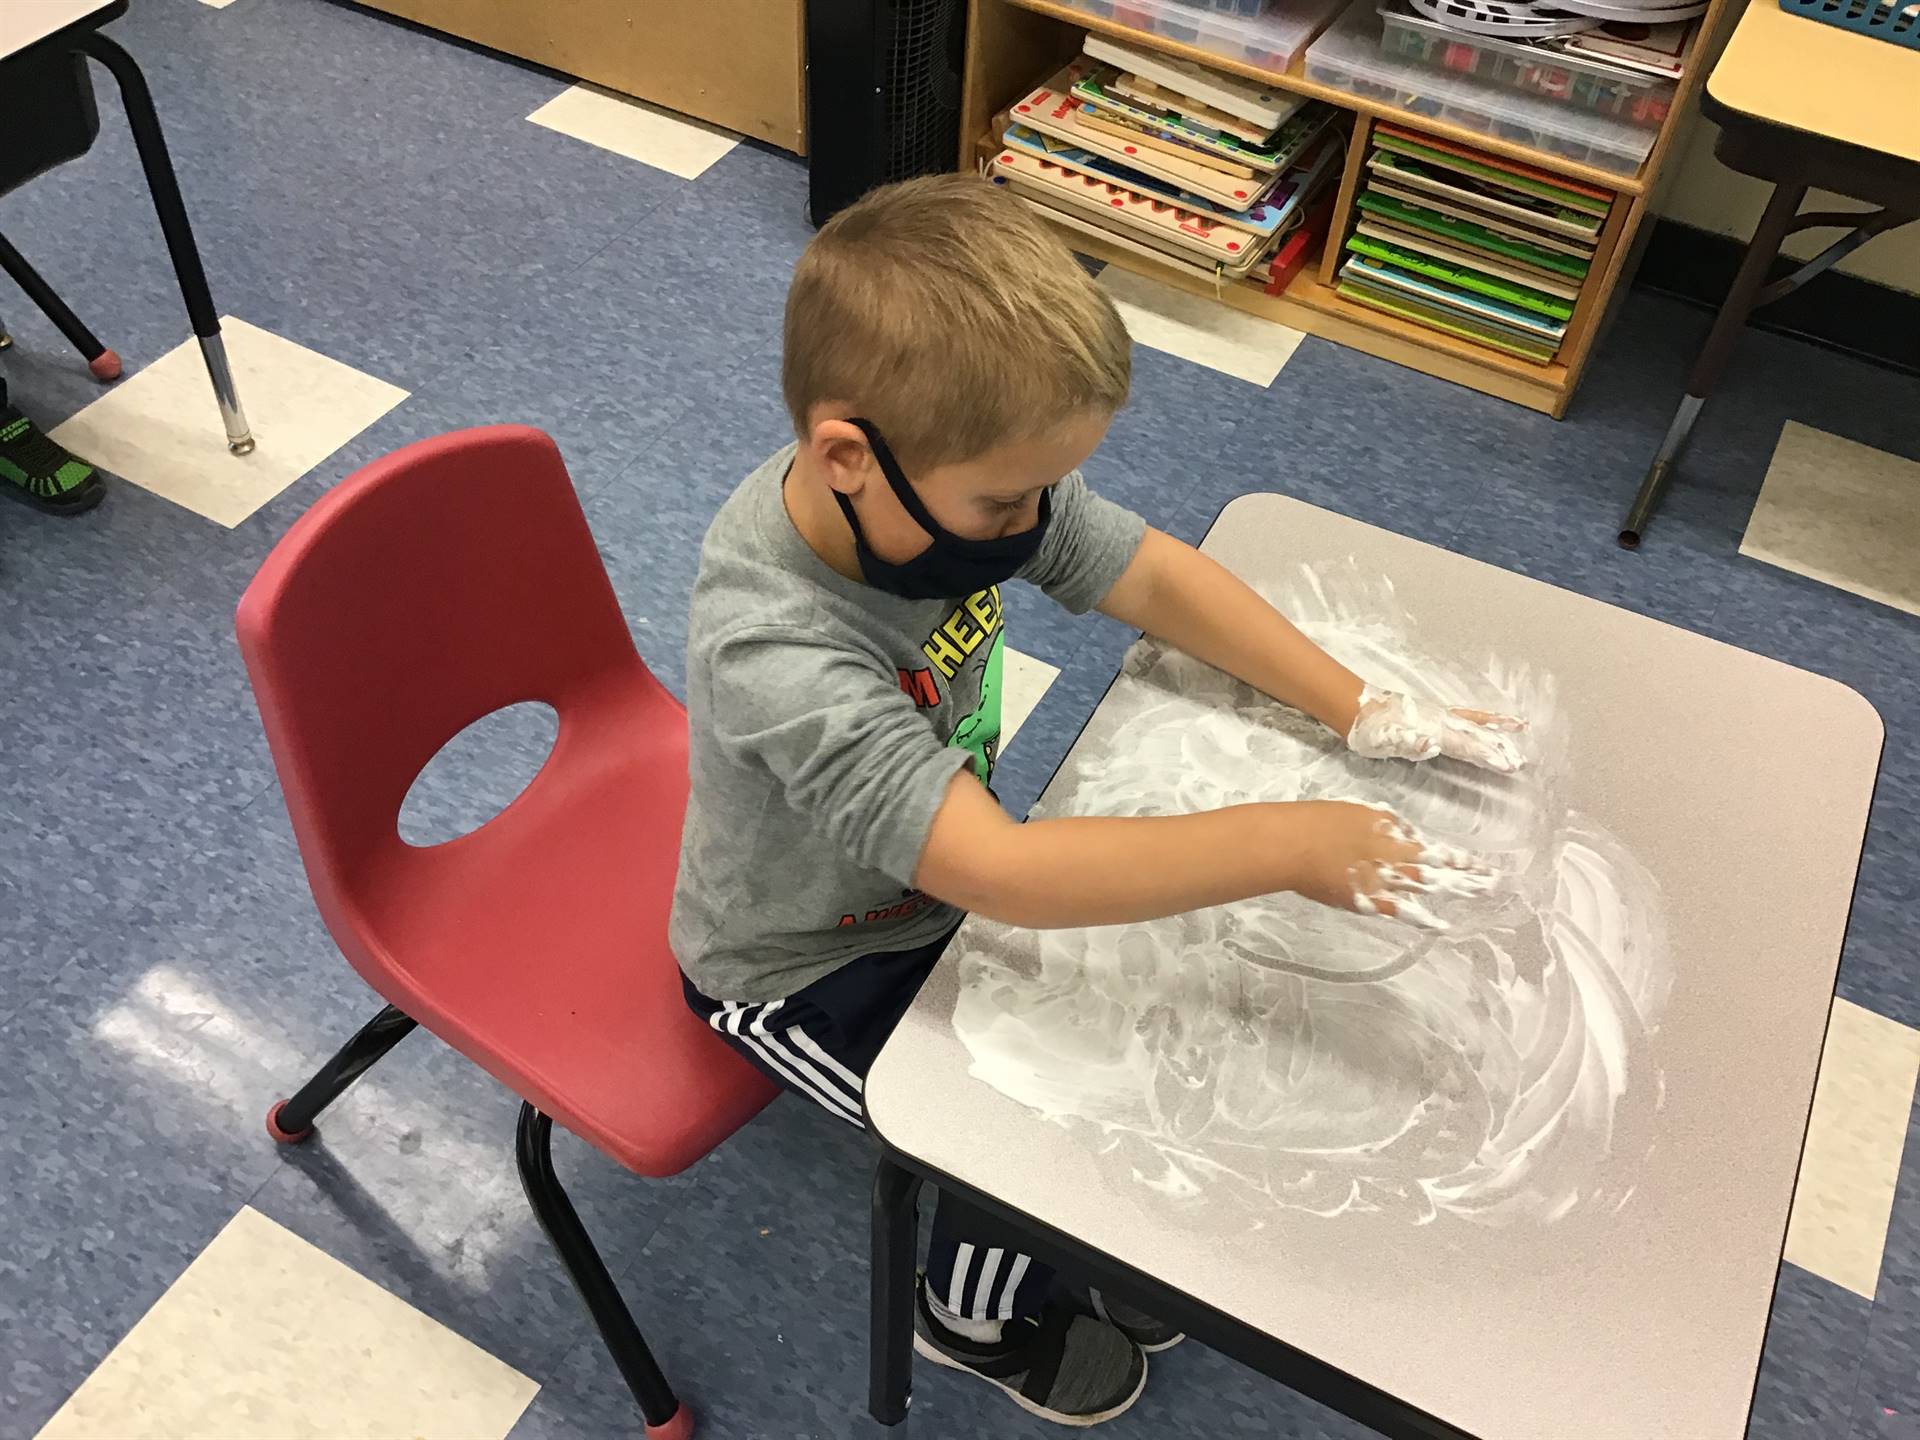 A student draws emotions in shaving cream.